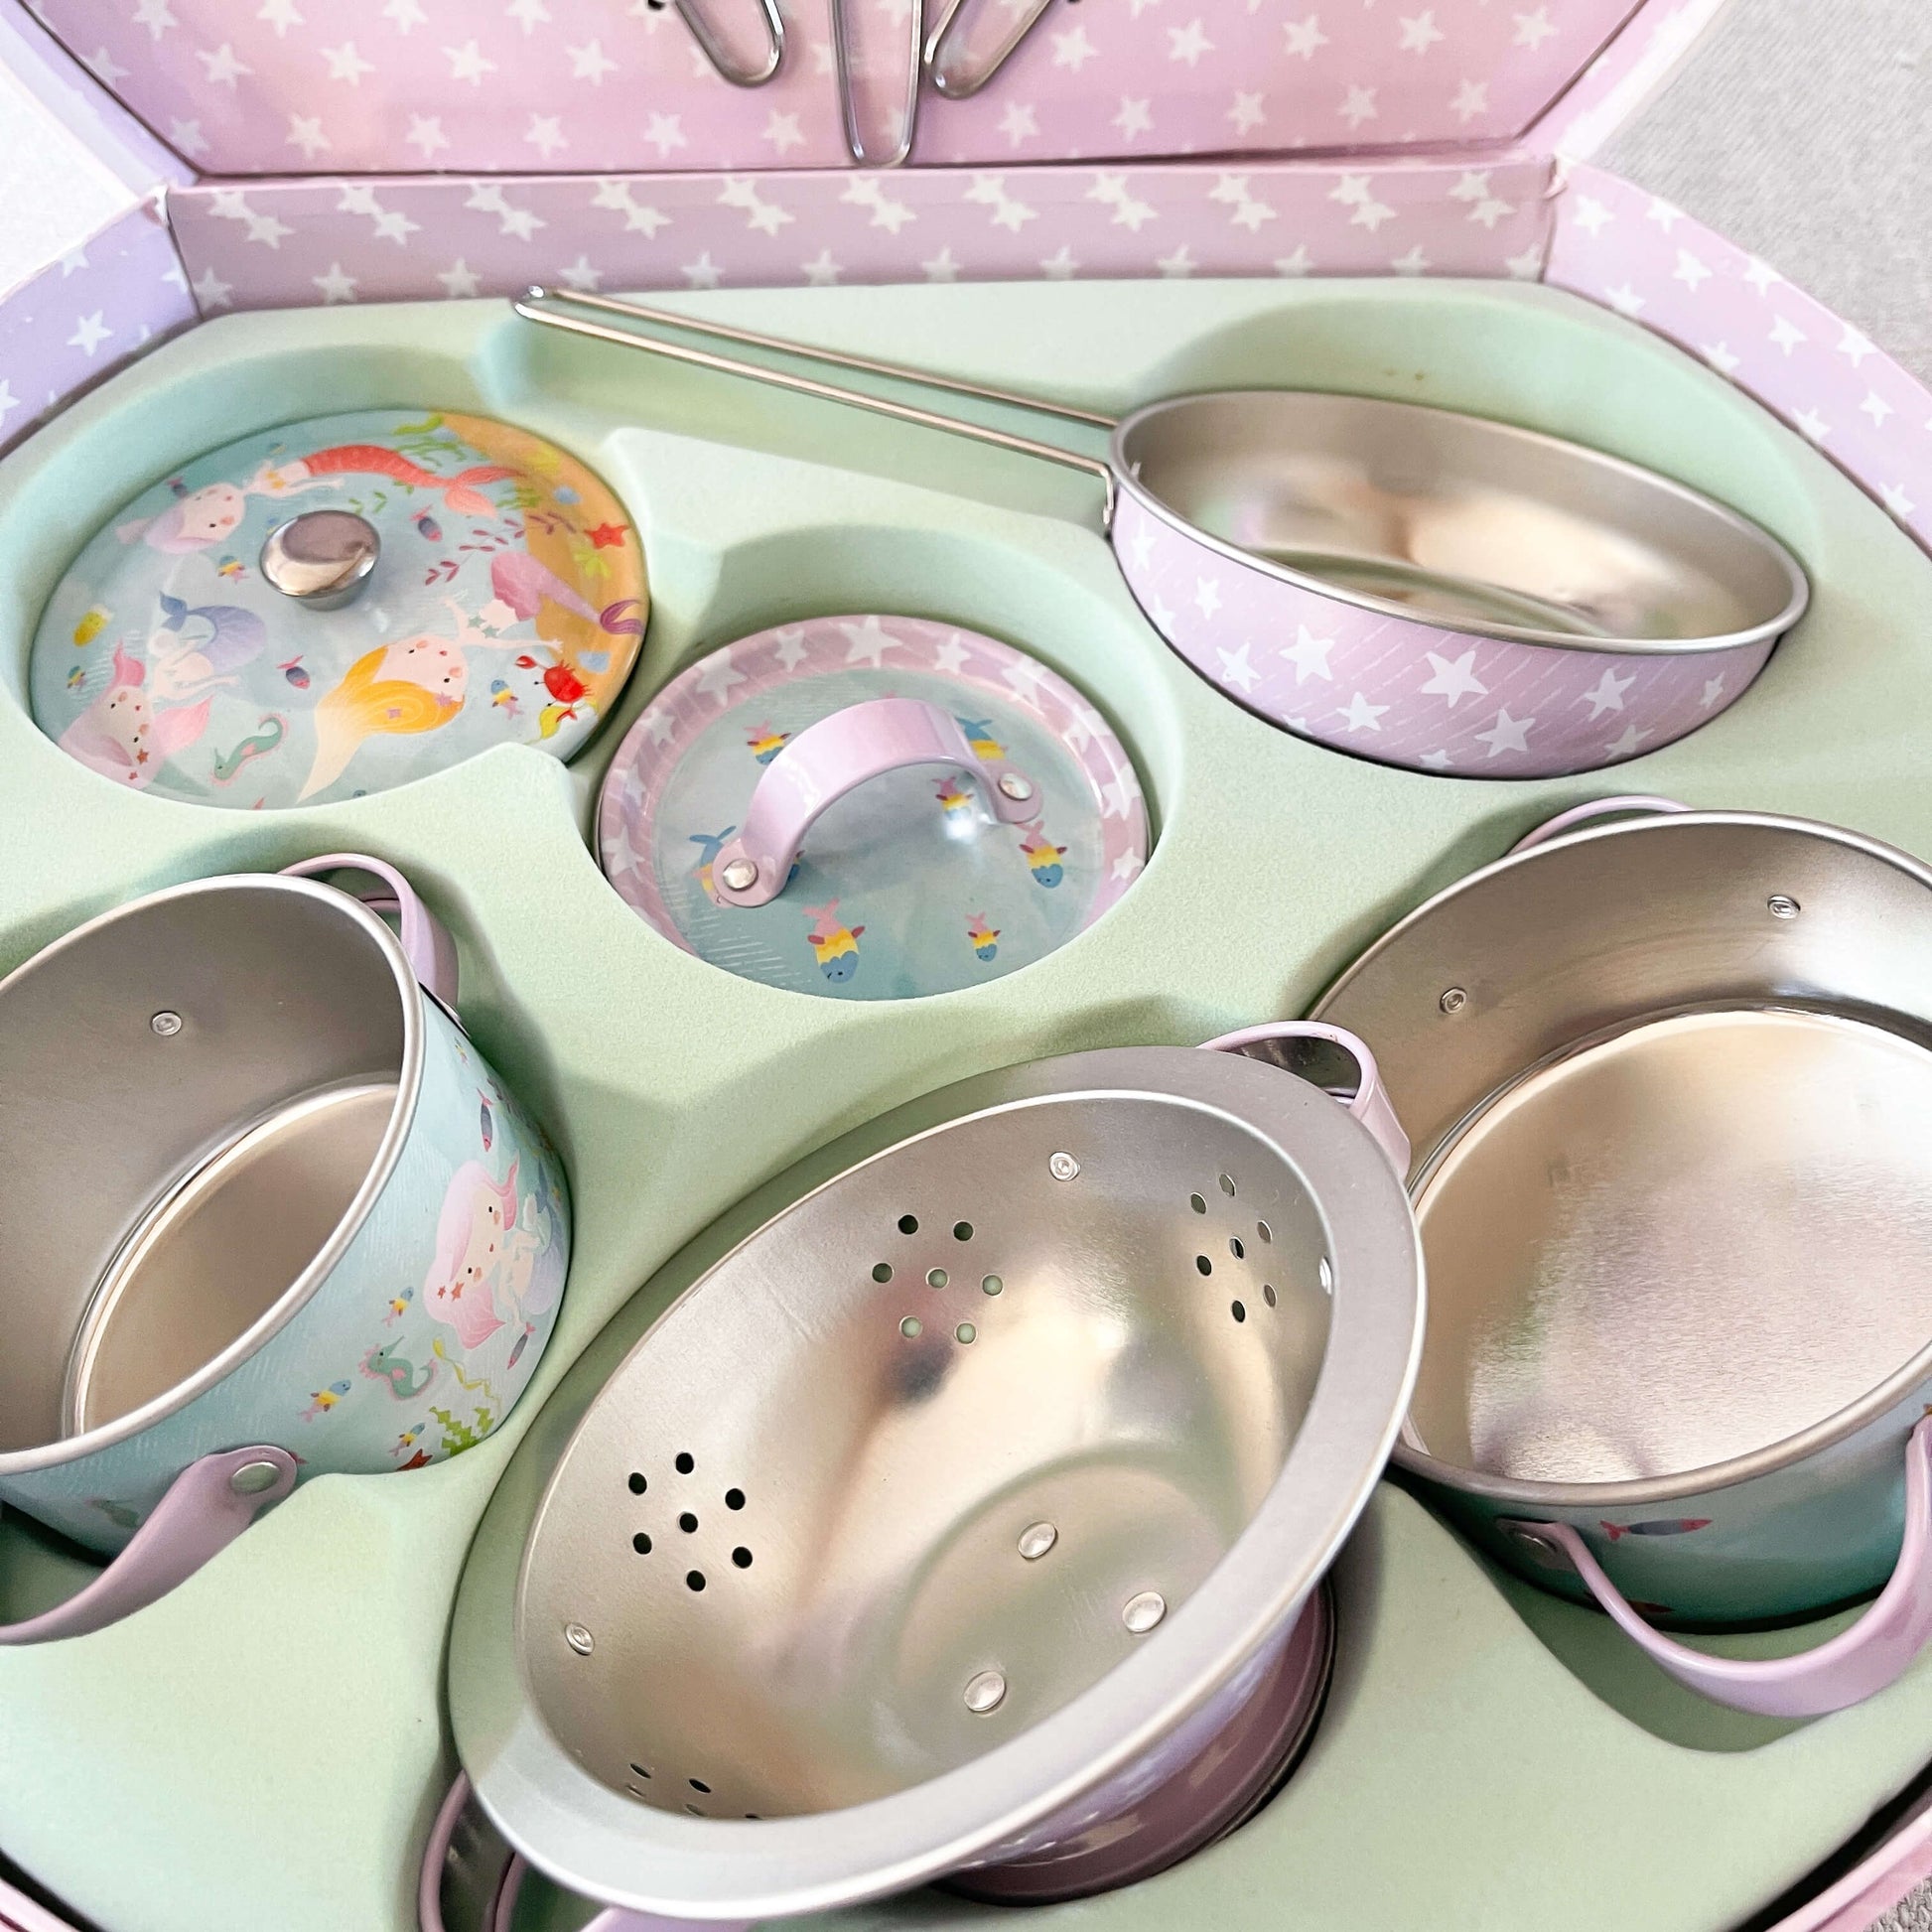 Childrens mermaid themed tin kitchen set close up or pots and pans in the attache case.